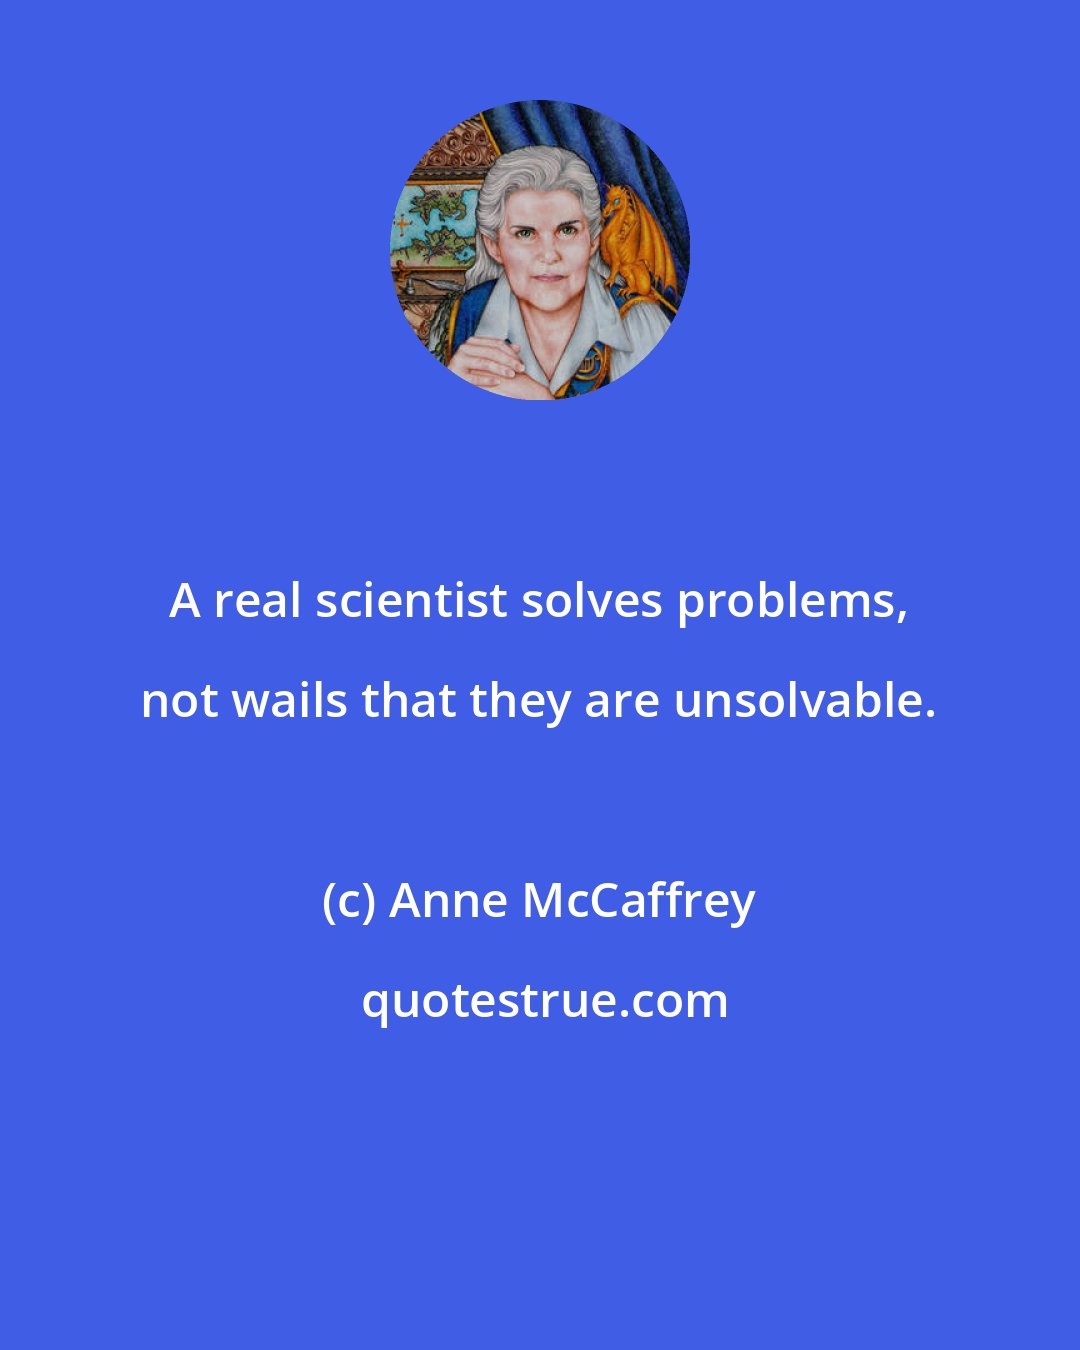 Anne McCaffrey: A real scientist solves problems, not wails that they are unsolvable.